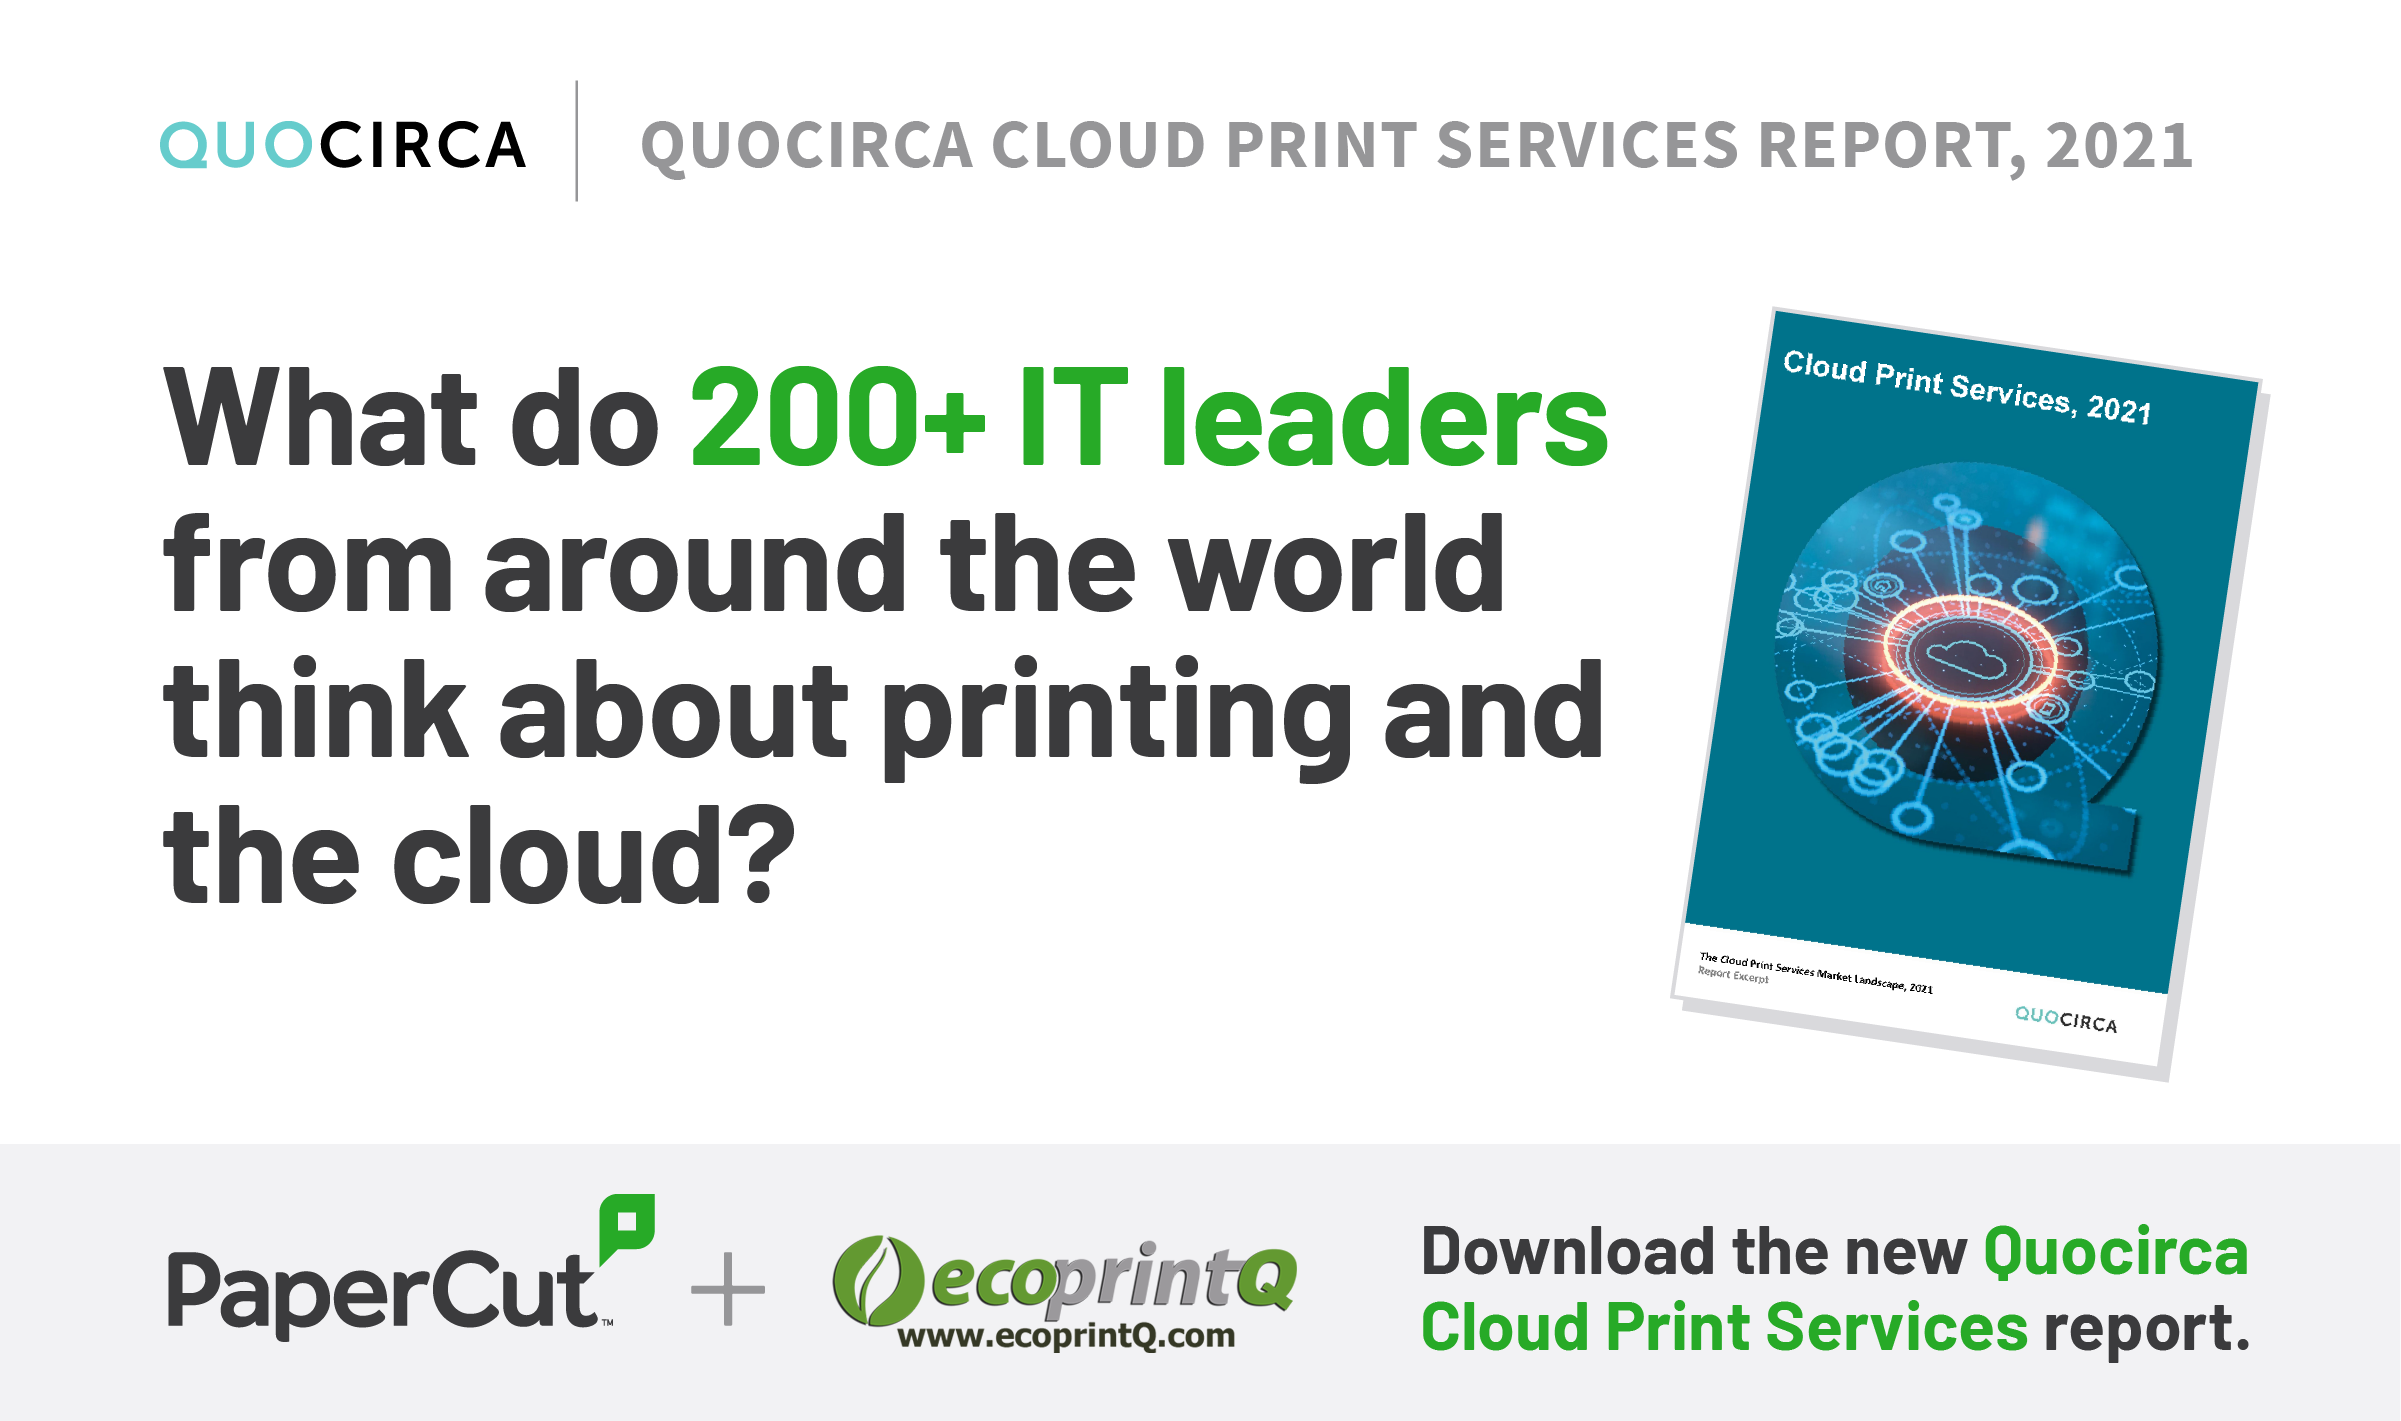 Why ecoprintQ thinks Quocirca’s new report is great news for PaperCut Hive